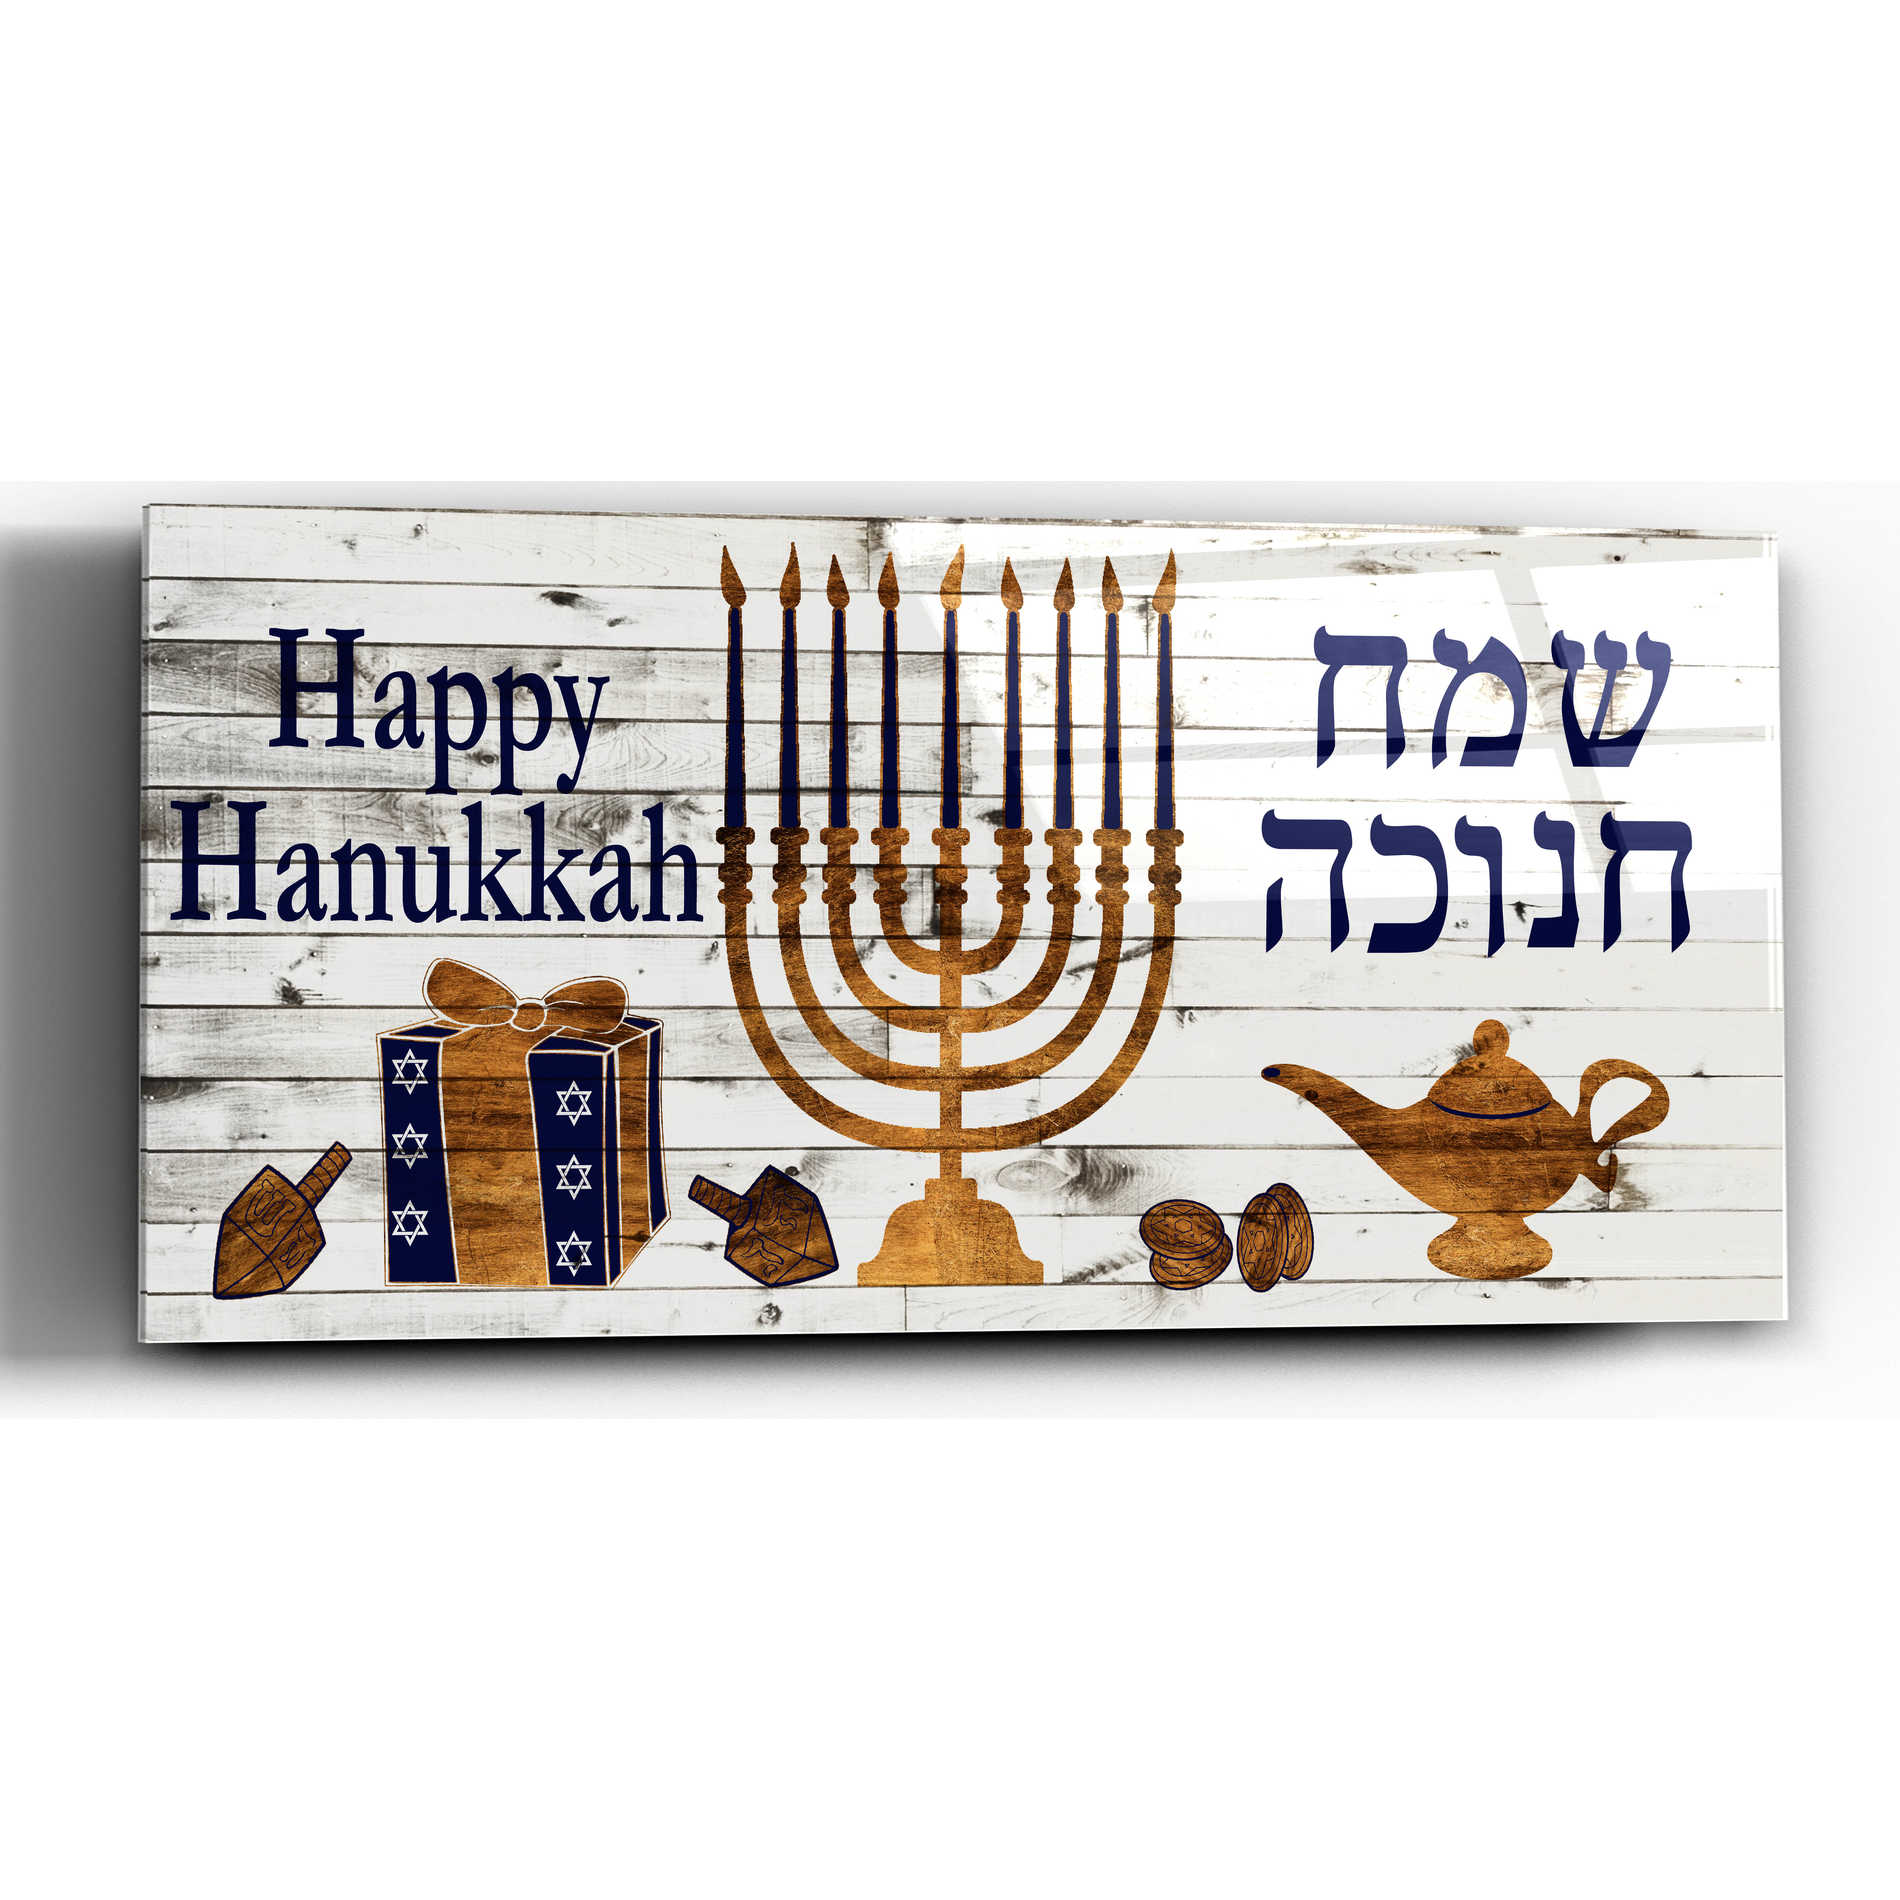 Epic Art 'Punny Hanukkah Collection H' by Alicia Ludwig, Acrylic Glass Wall Art,48x24